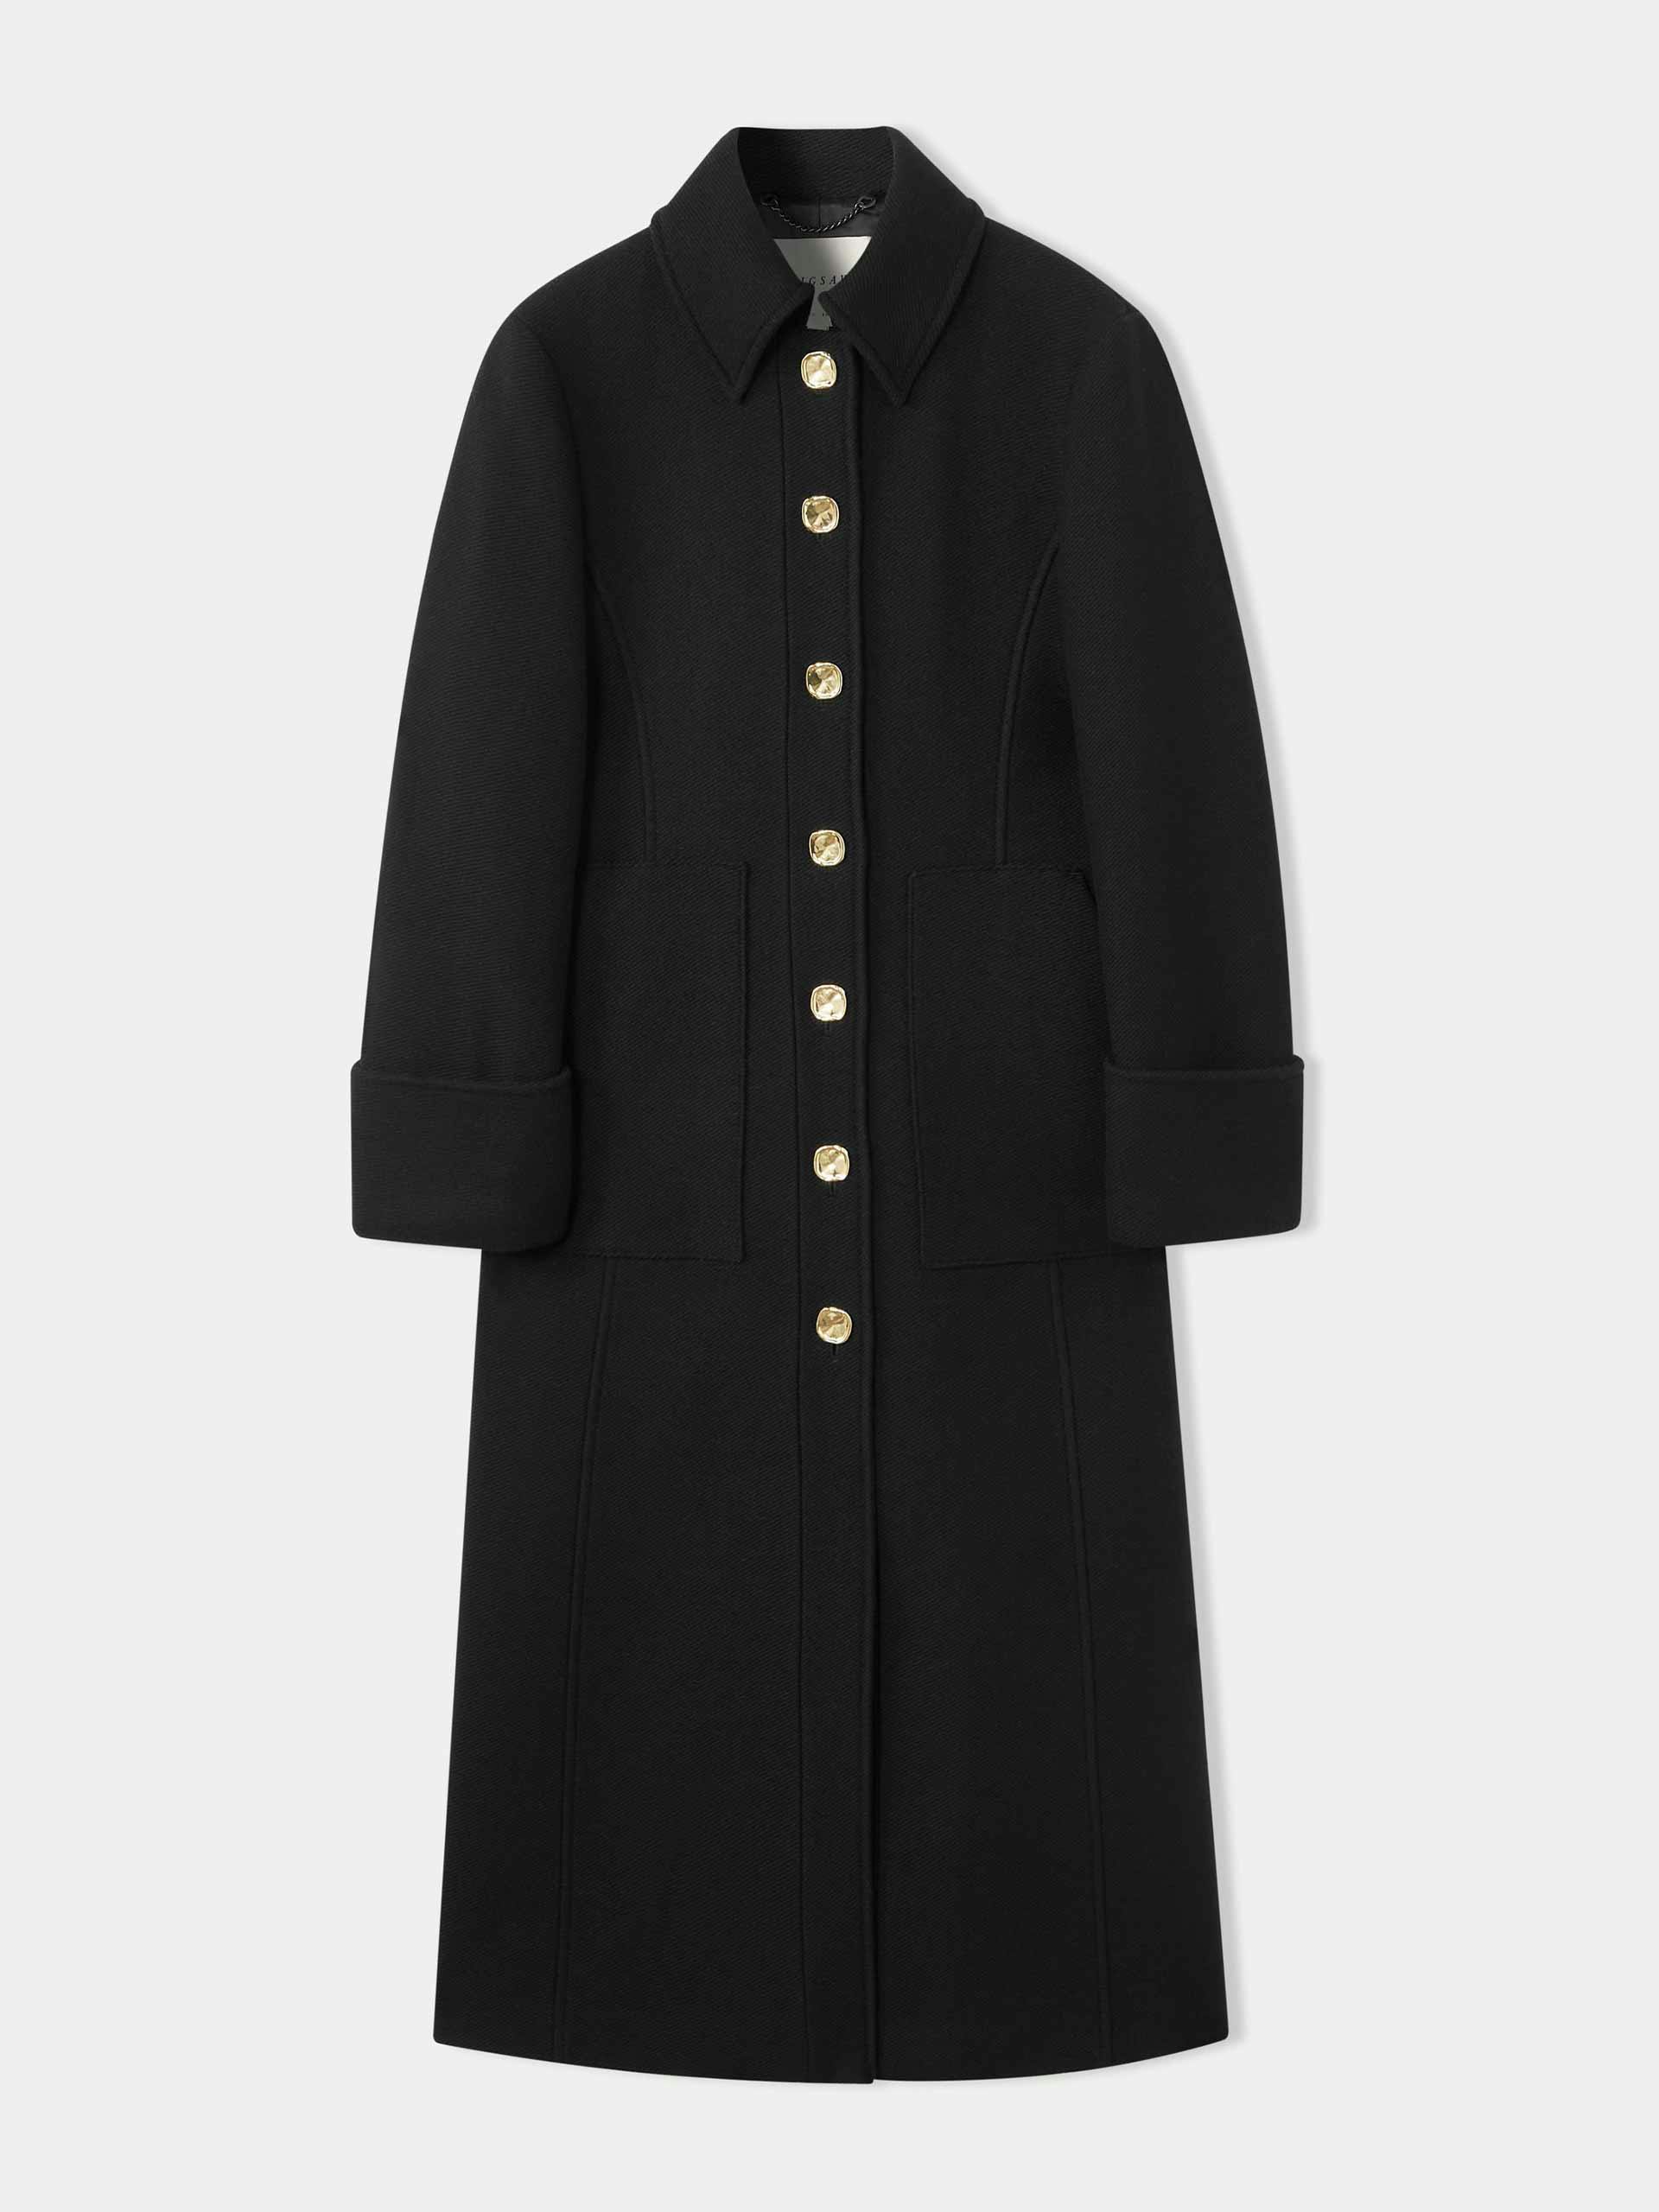 Black wool coat with gold buttons